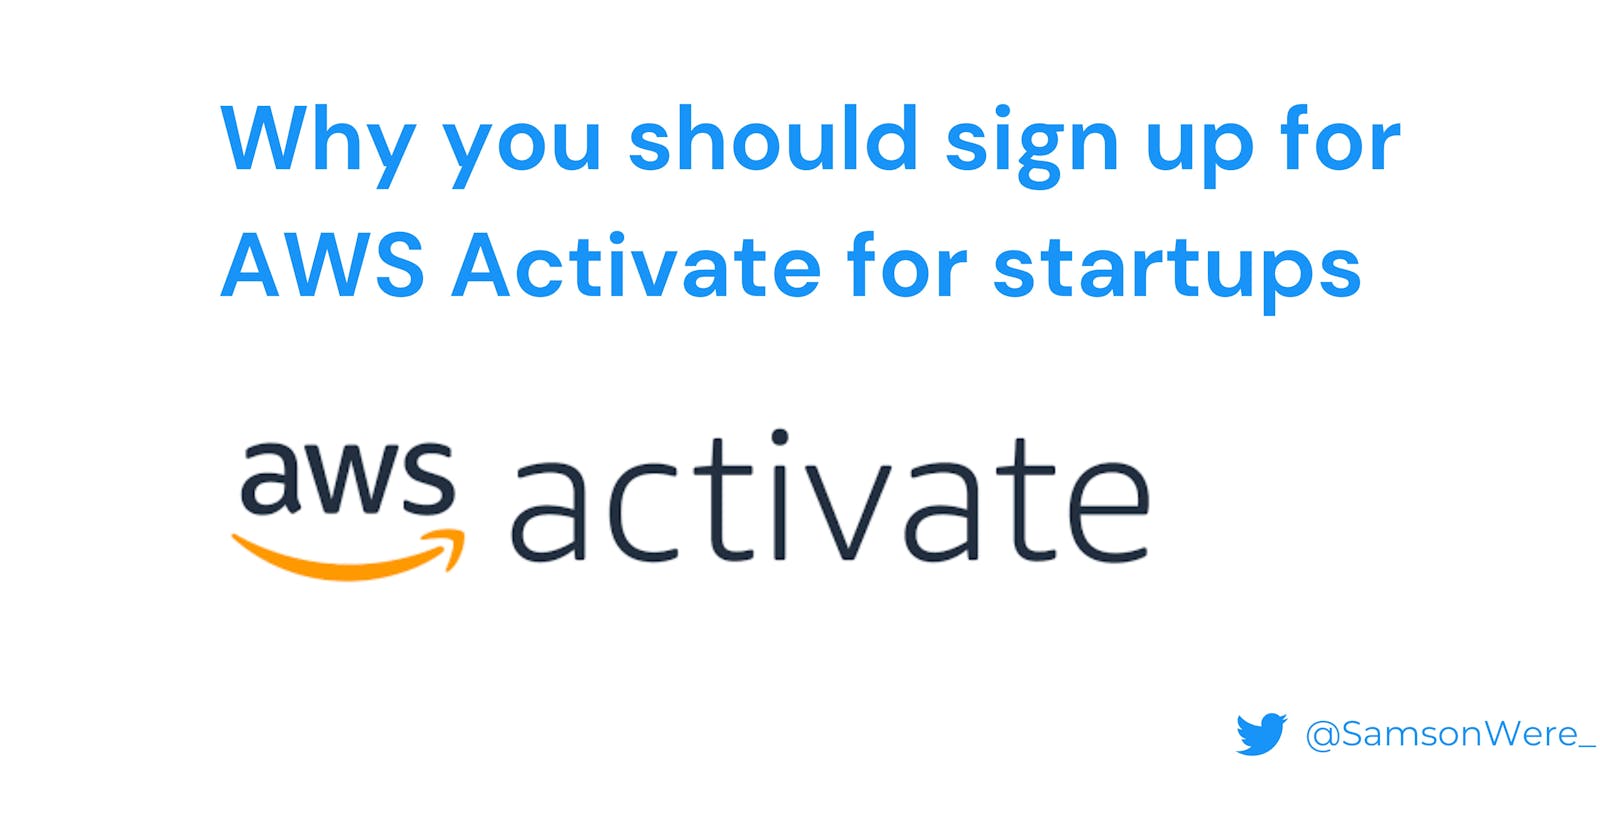 Why you should sign up for AWS Activate for startups